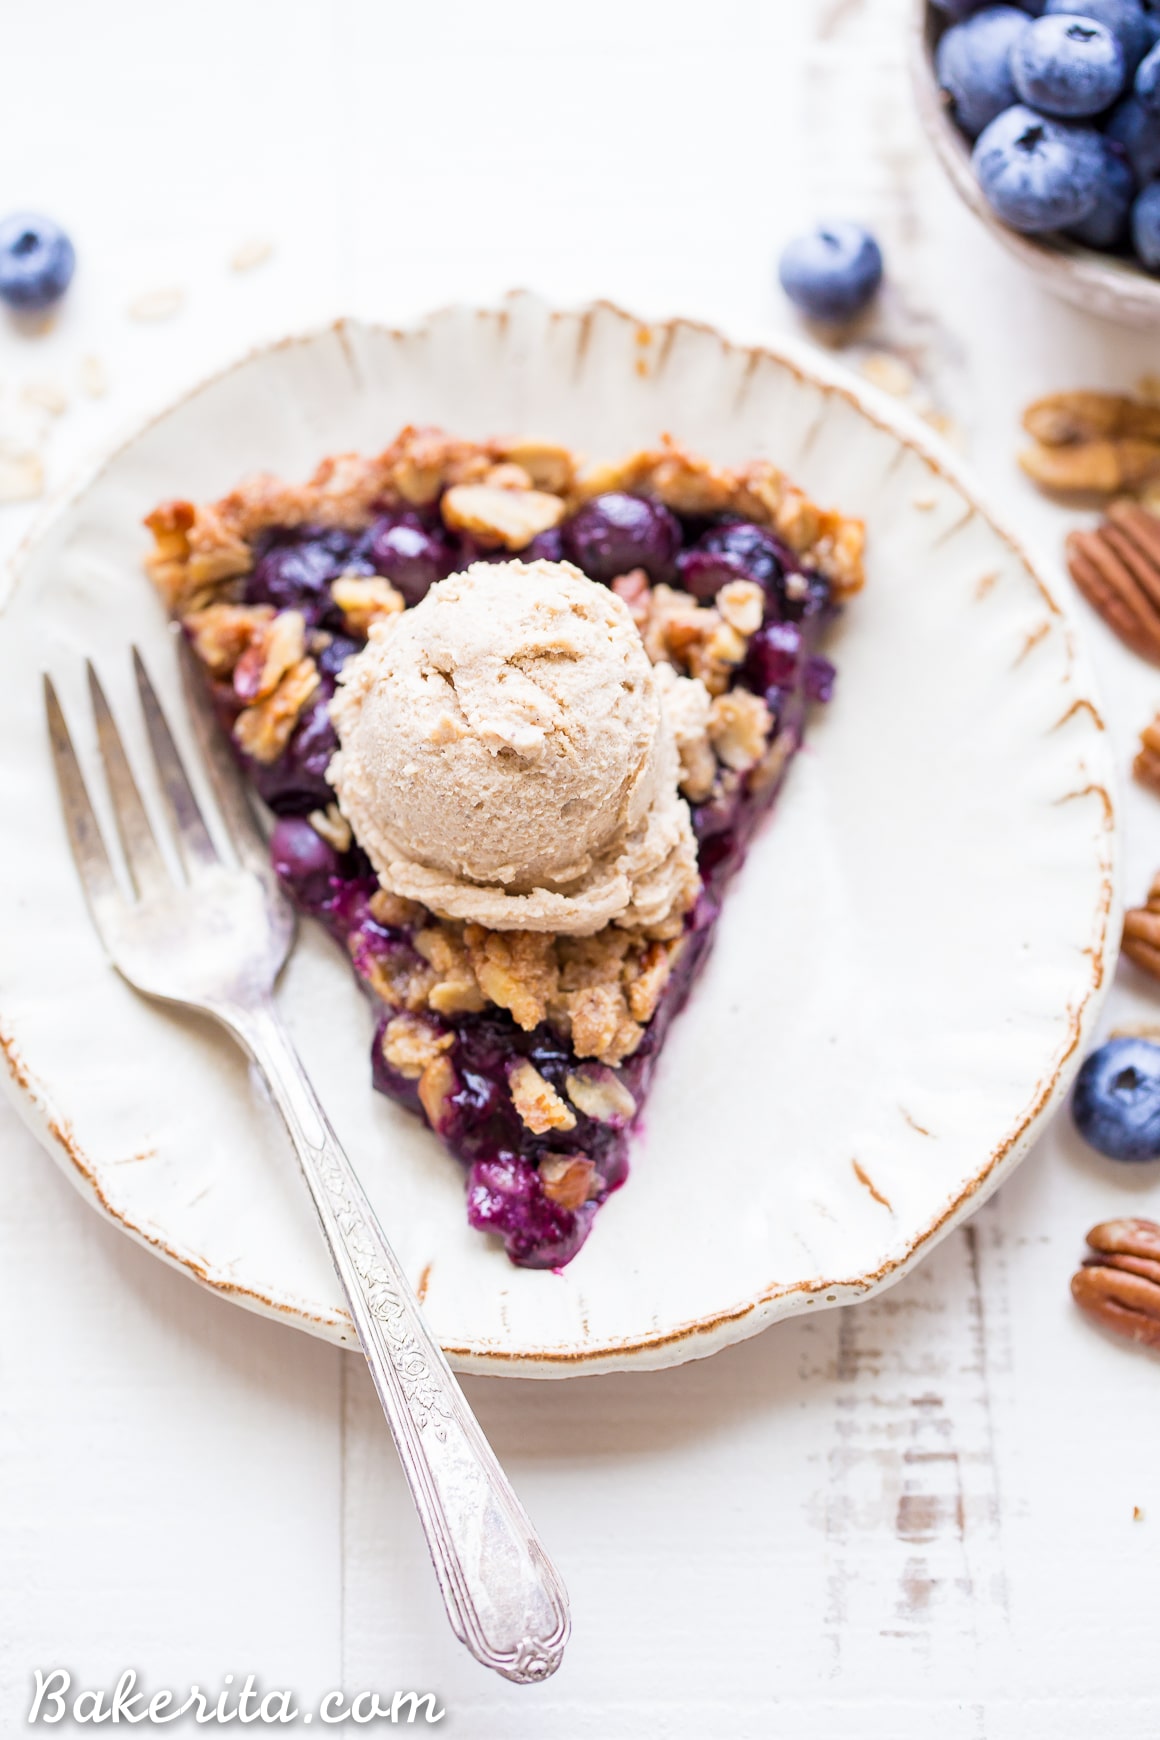 This Blueberry Crisp Tart with Oatmeal Crust comes together quickly and easily, and it's the perfect use for your fresh blueberries! This simple recipe is gluten-free & vegan.